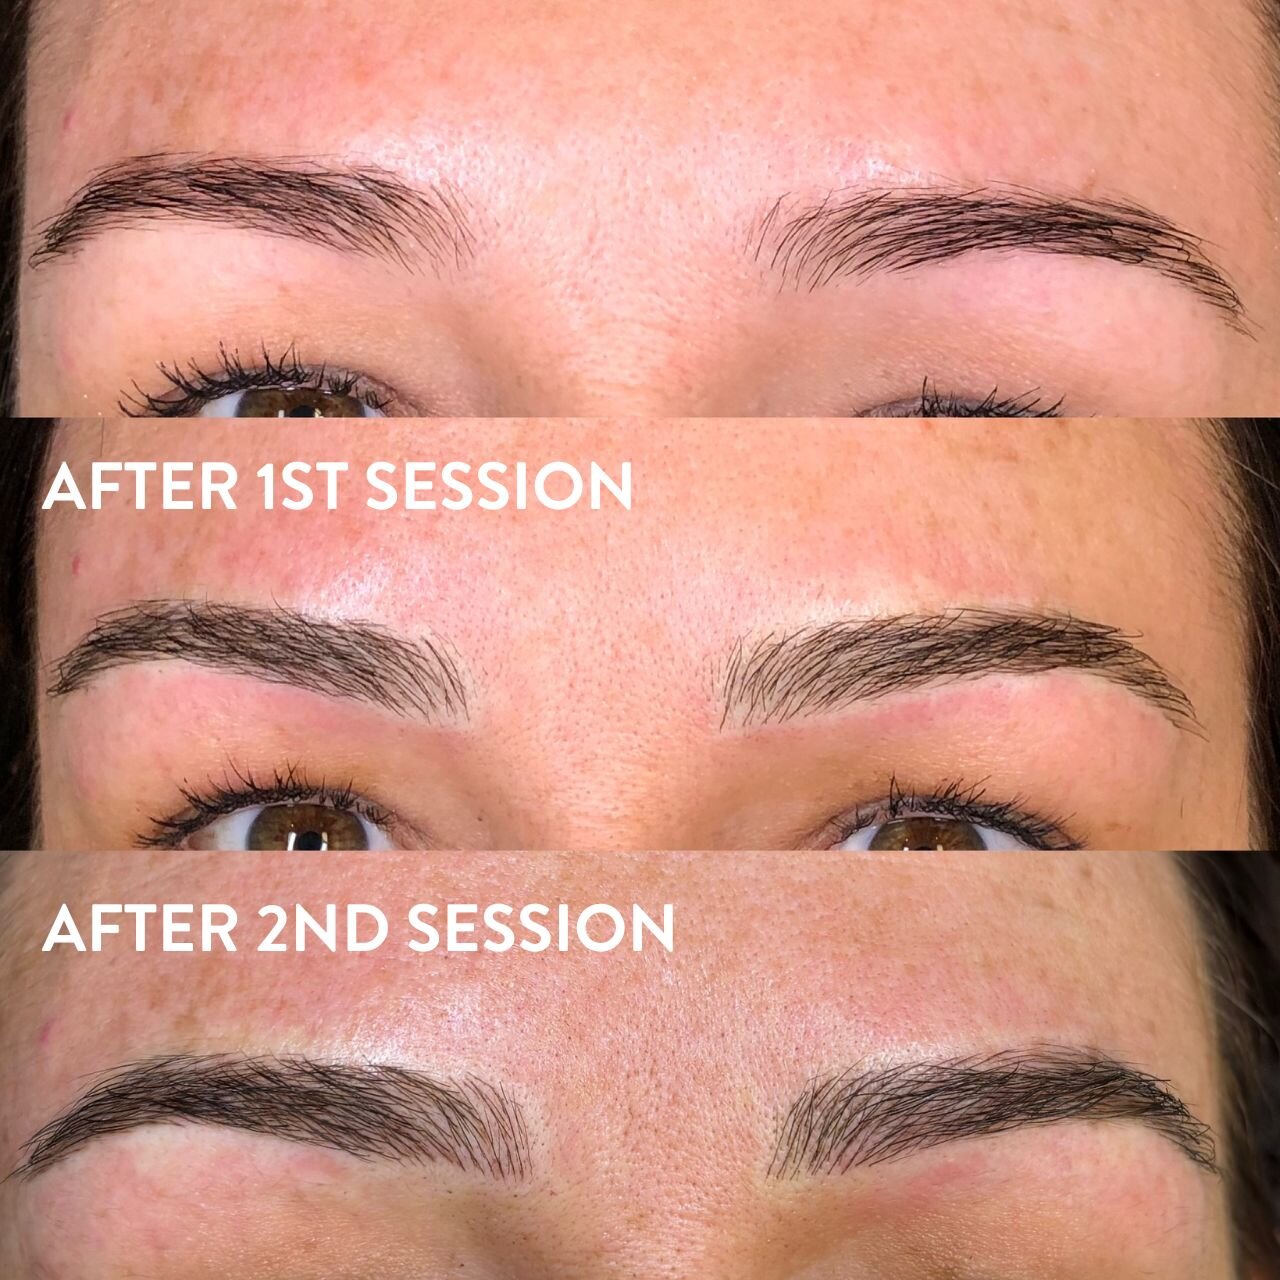 Brows after 1st and 2nd session of microblading.

Can you see the seamlessly blended hair strokes as if they were her own existing brows?

Brows by Annaliese.

Book your free consult for SPMU (Semi-Permanent Makeup) treatments. 

Remember to book bef